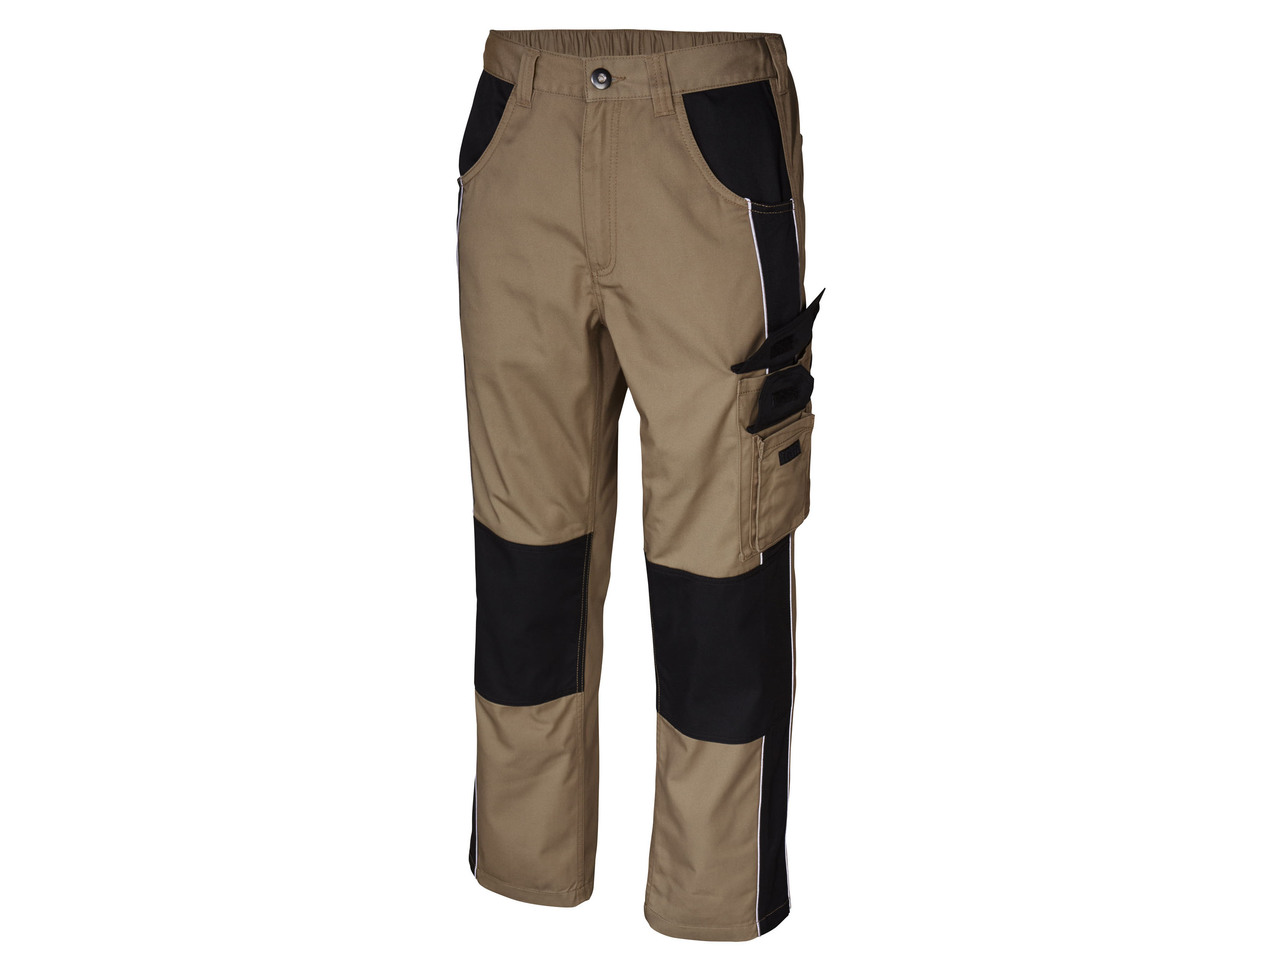 Men's Working Trousers